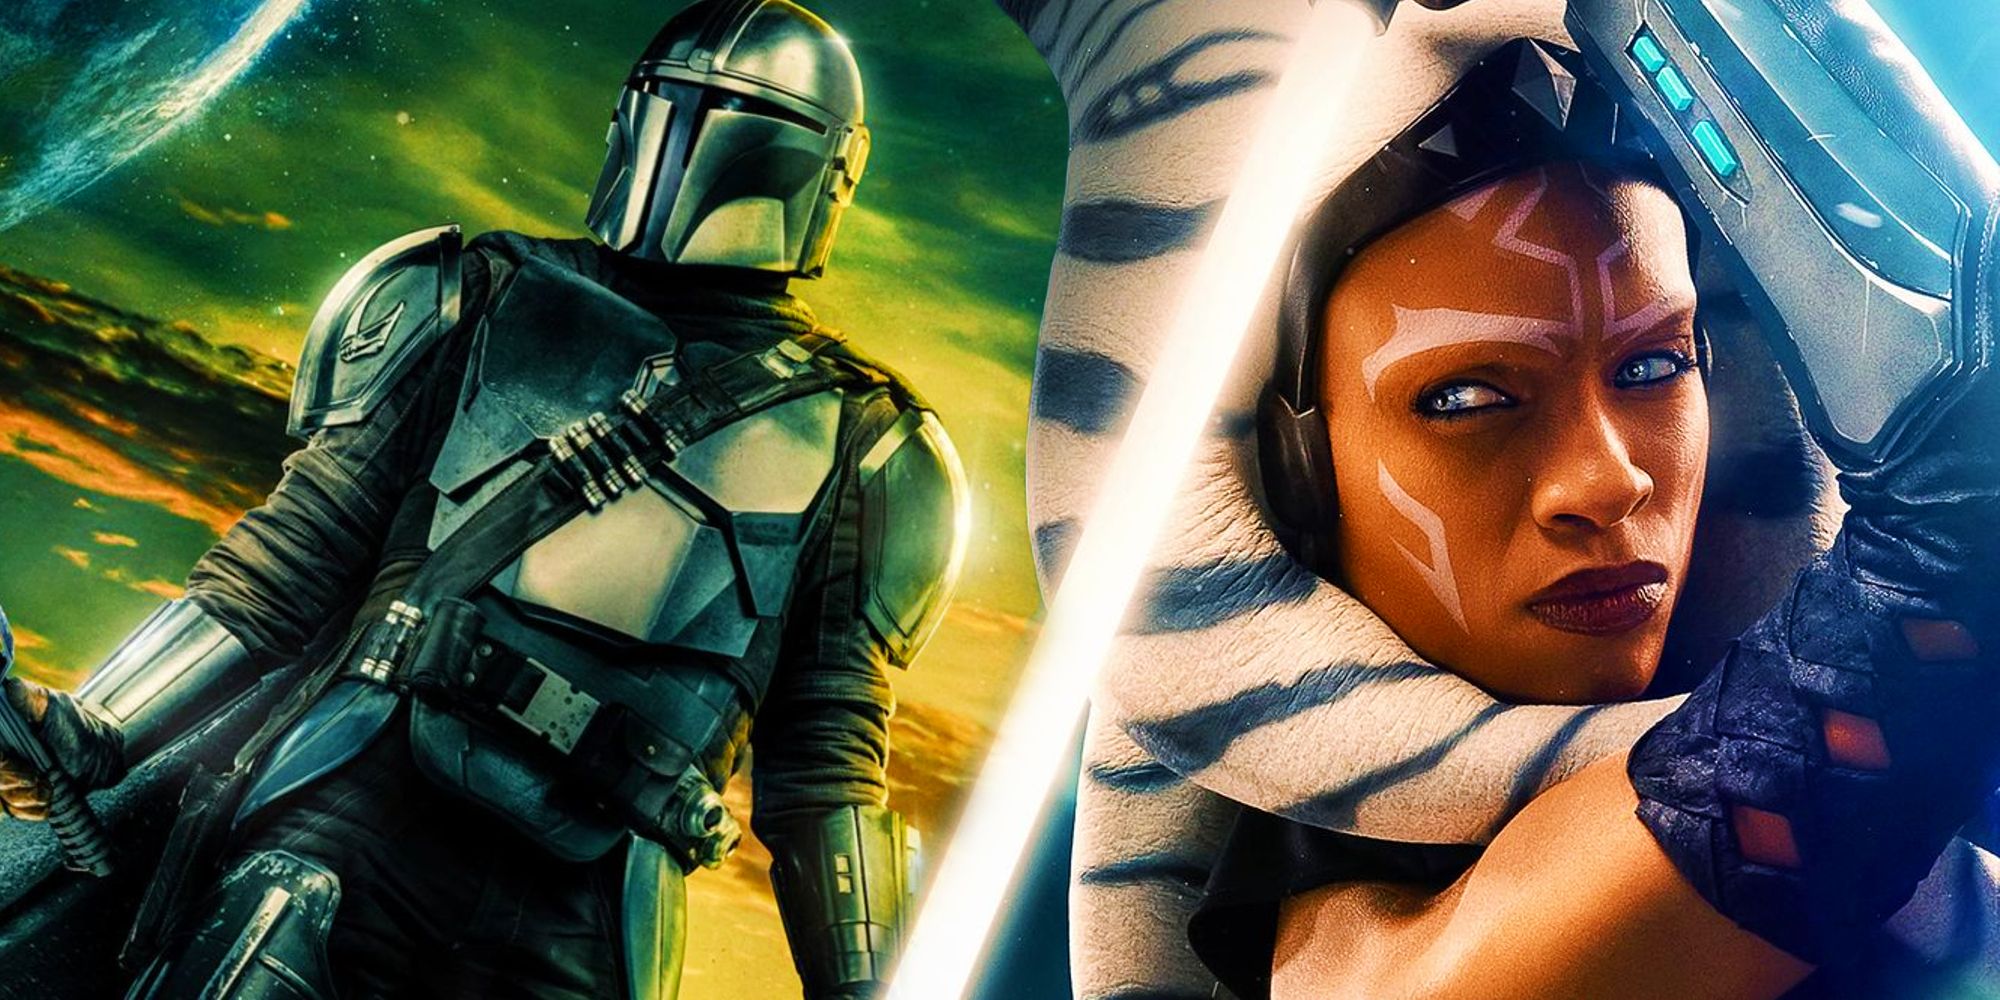 Din Djarin in the poster for Mandalorian Season 3 next to Ahsoka in the official poster for the show